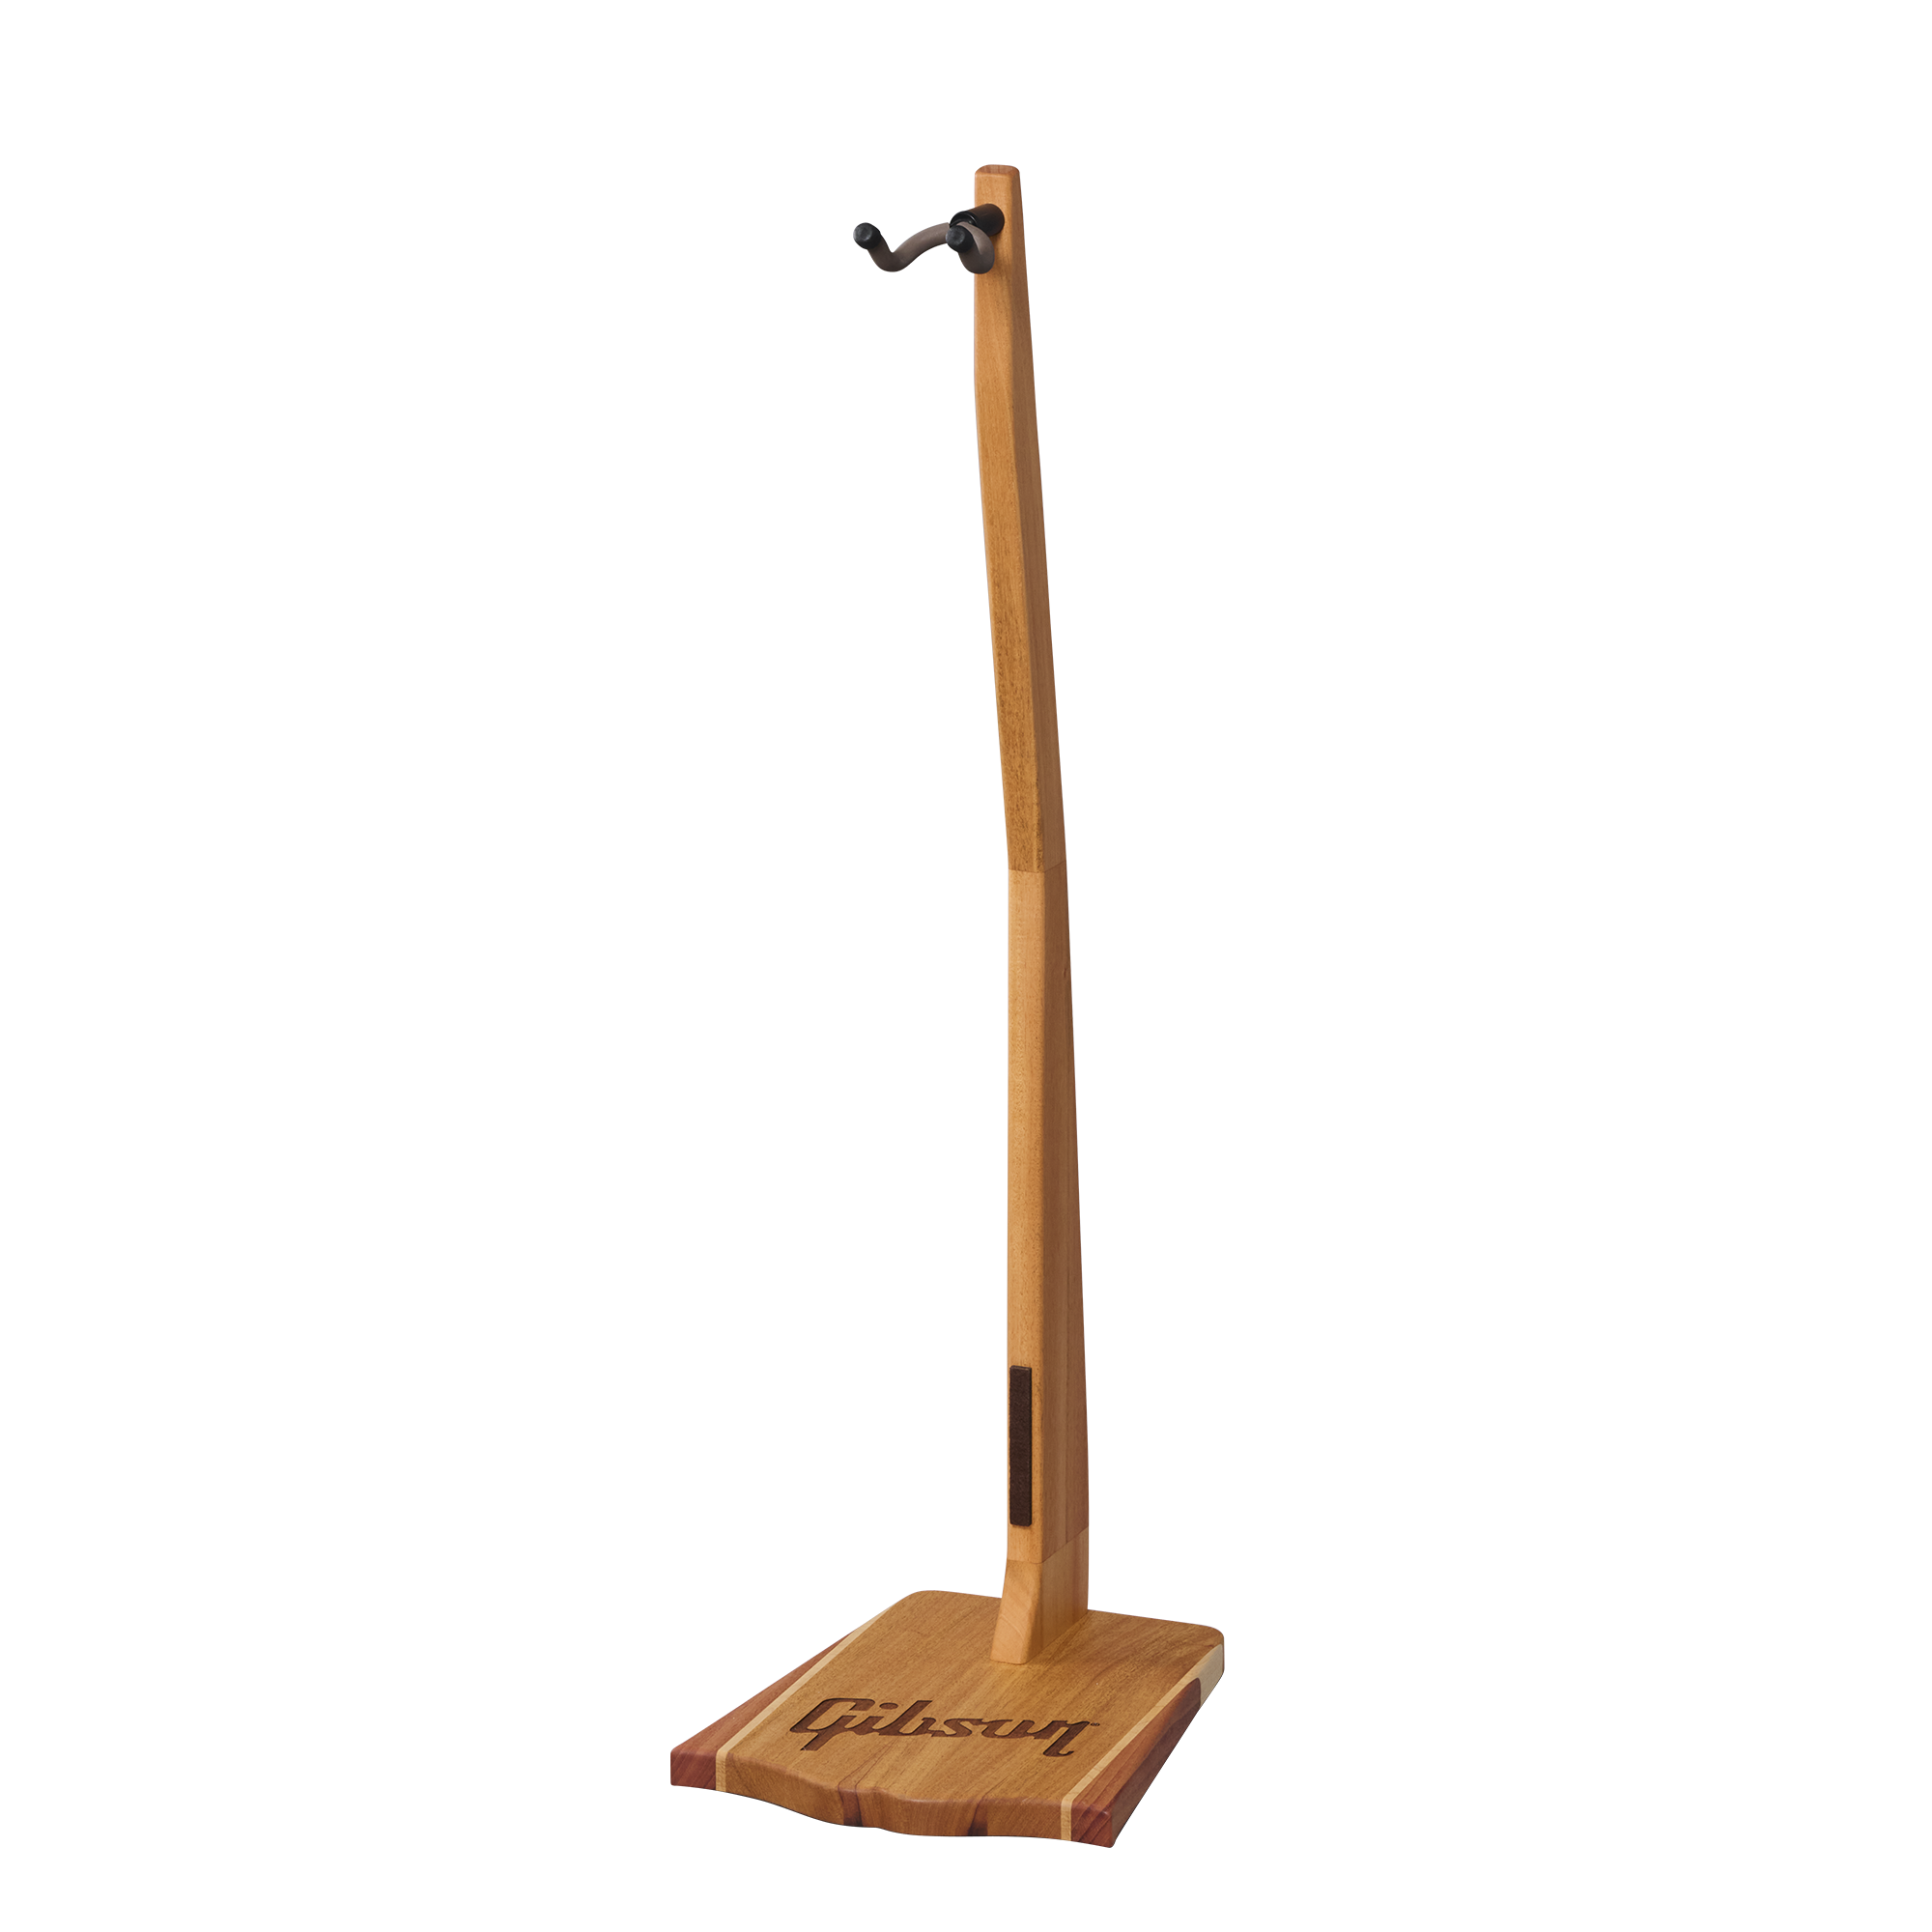 GIBSON ACCESSORIES HANDCRAFTED WOODEN GUITAR STAND (ASTD-MG2)